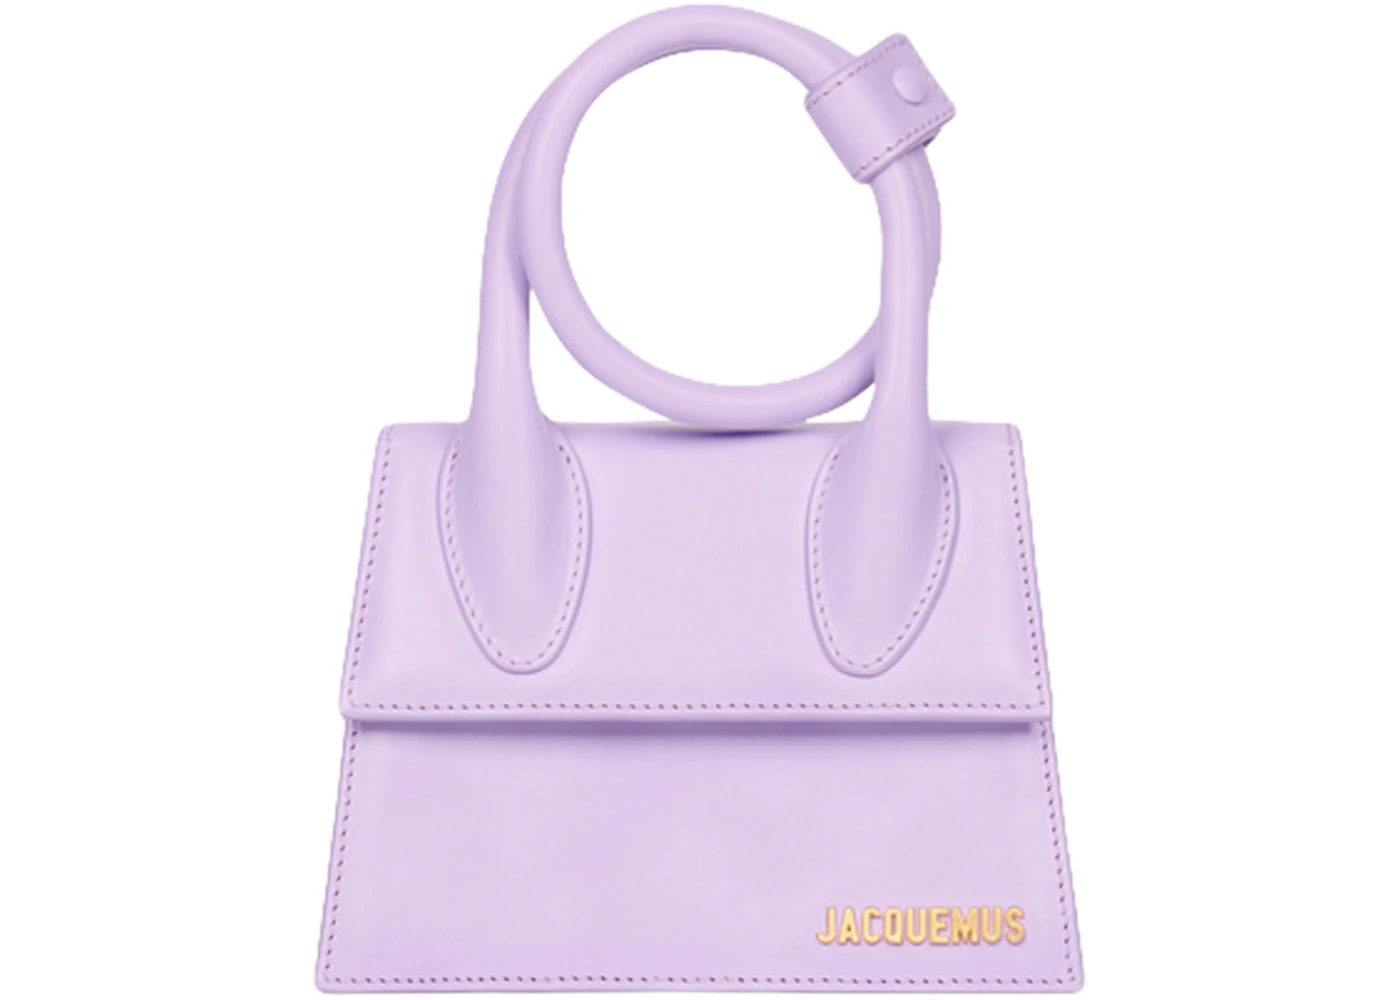 Jacquemus Le Chiquito Noeud Coiled Handbag Lilac in Cowskin Leather ...